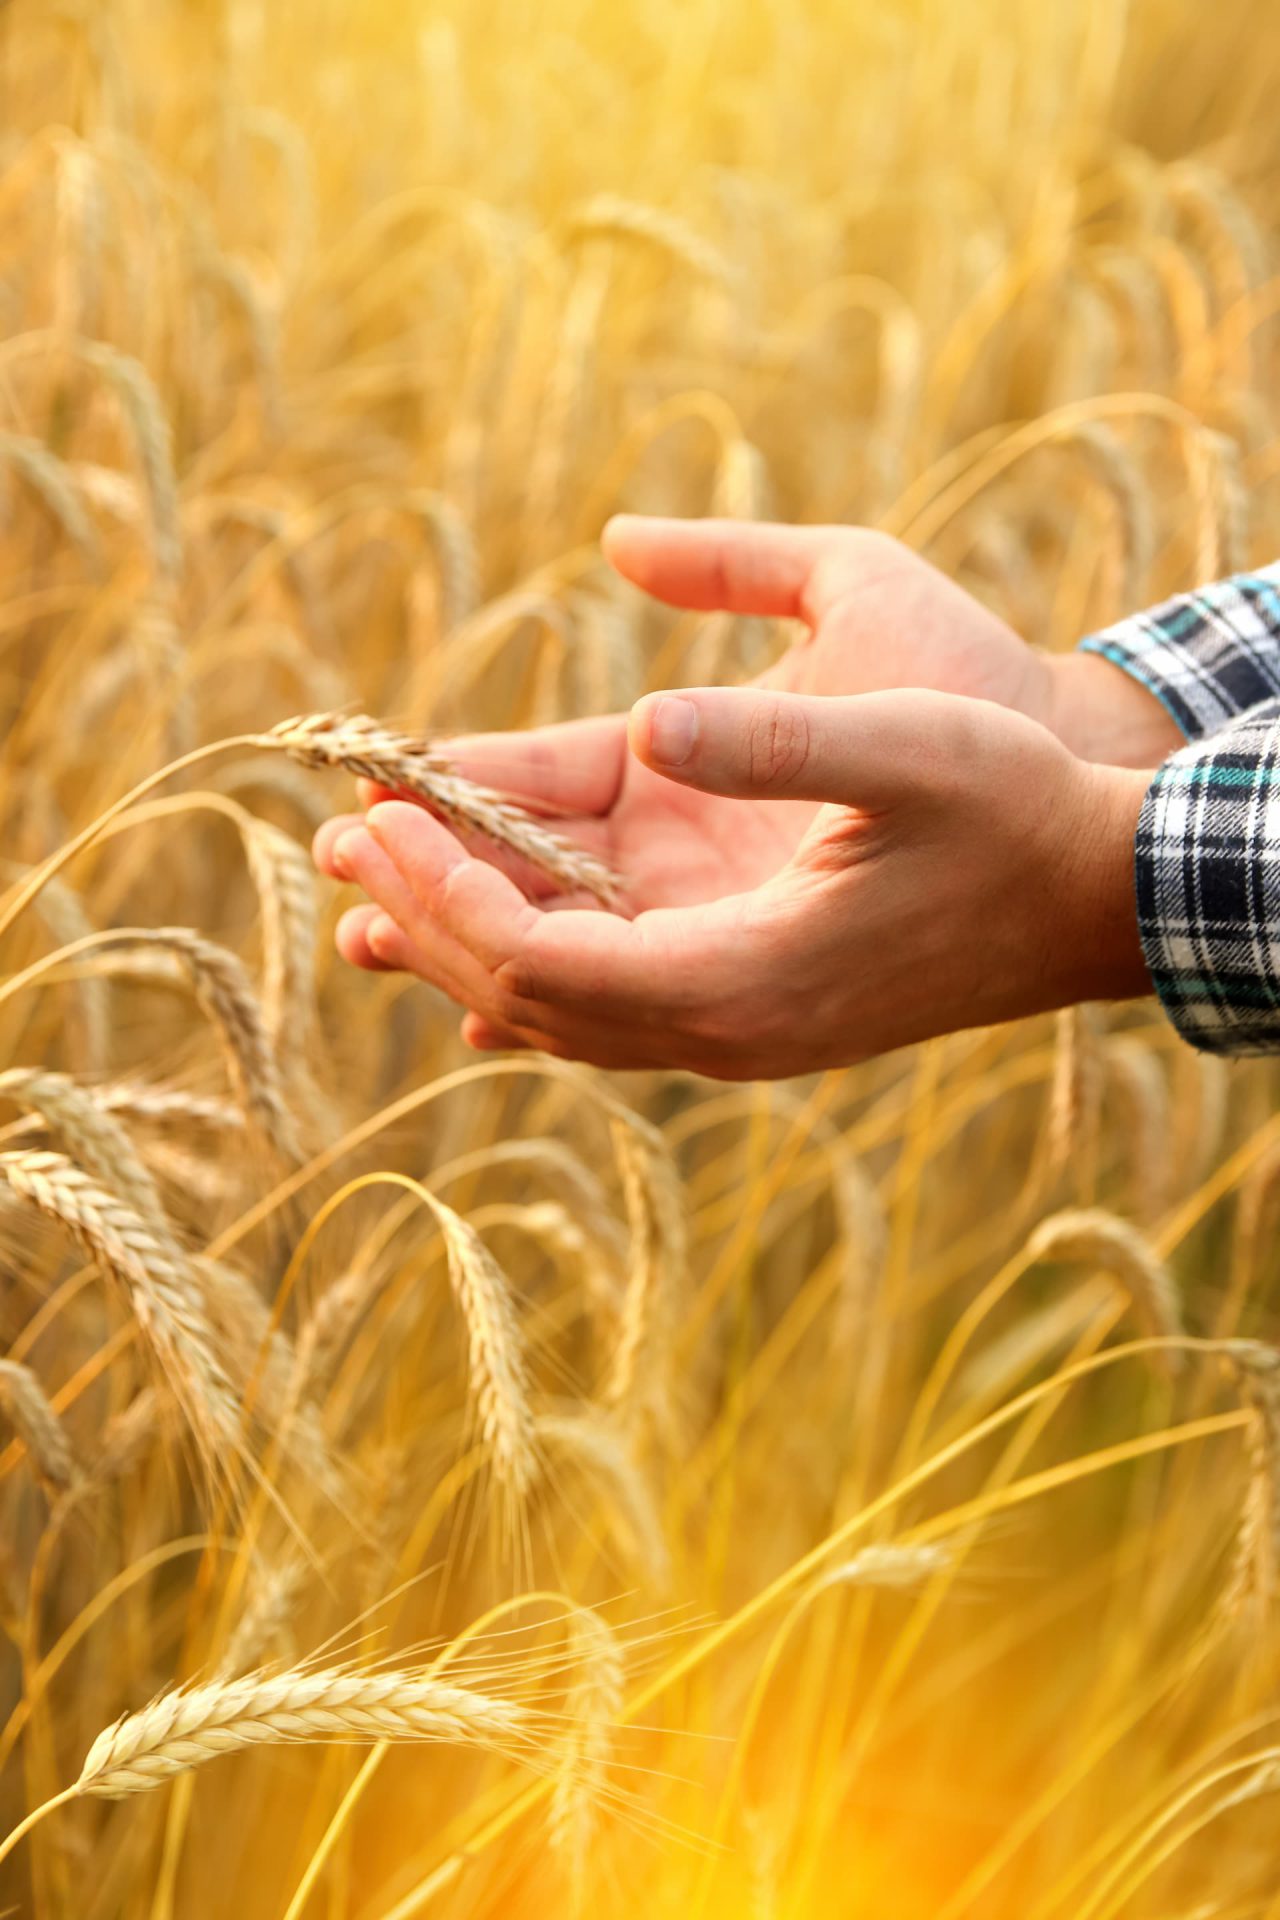 A man holds golden wheat ears amidst a ripening field, inspecting the quality of the grain on the spikelets. Closeup shot from a side view.